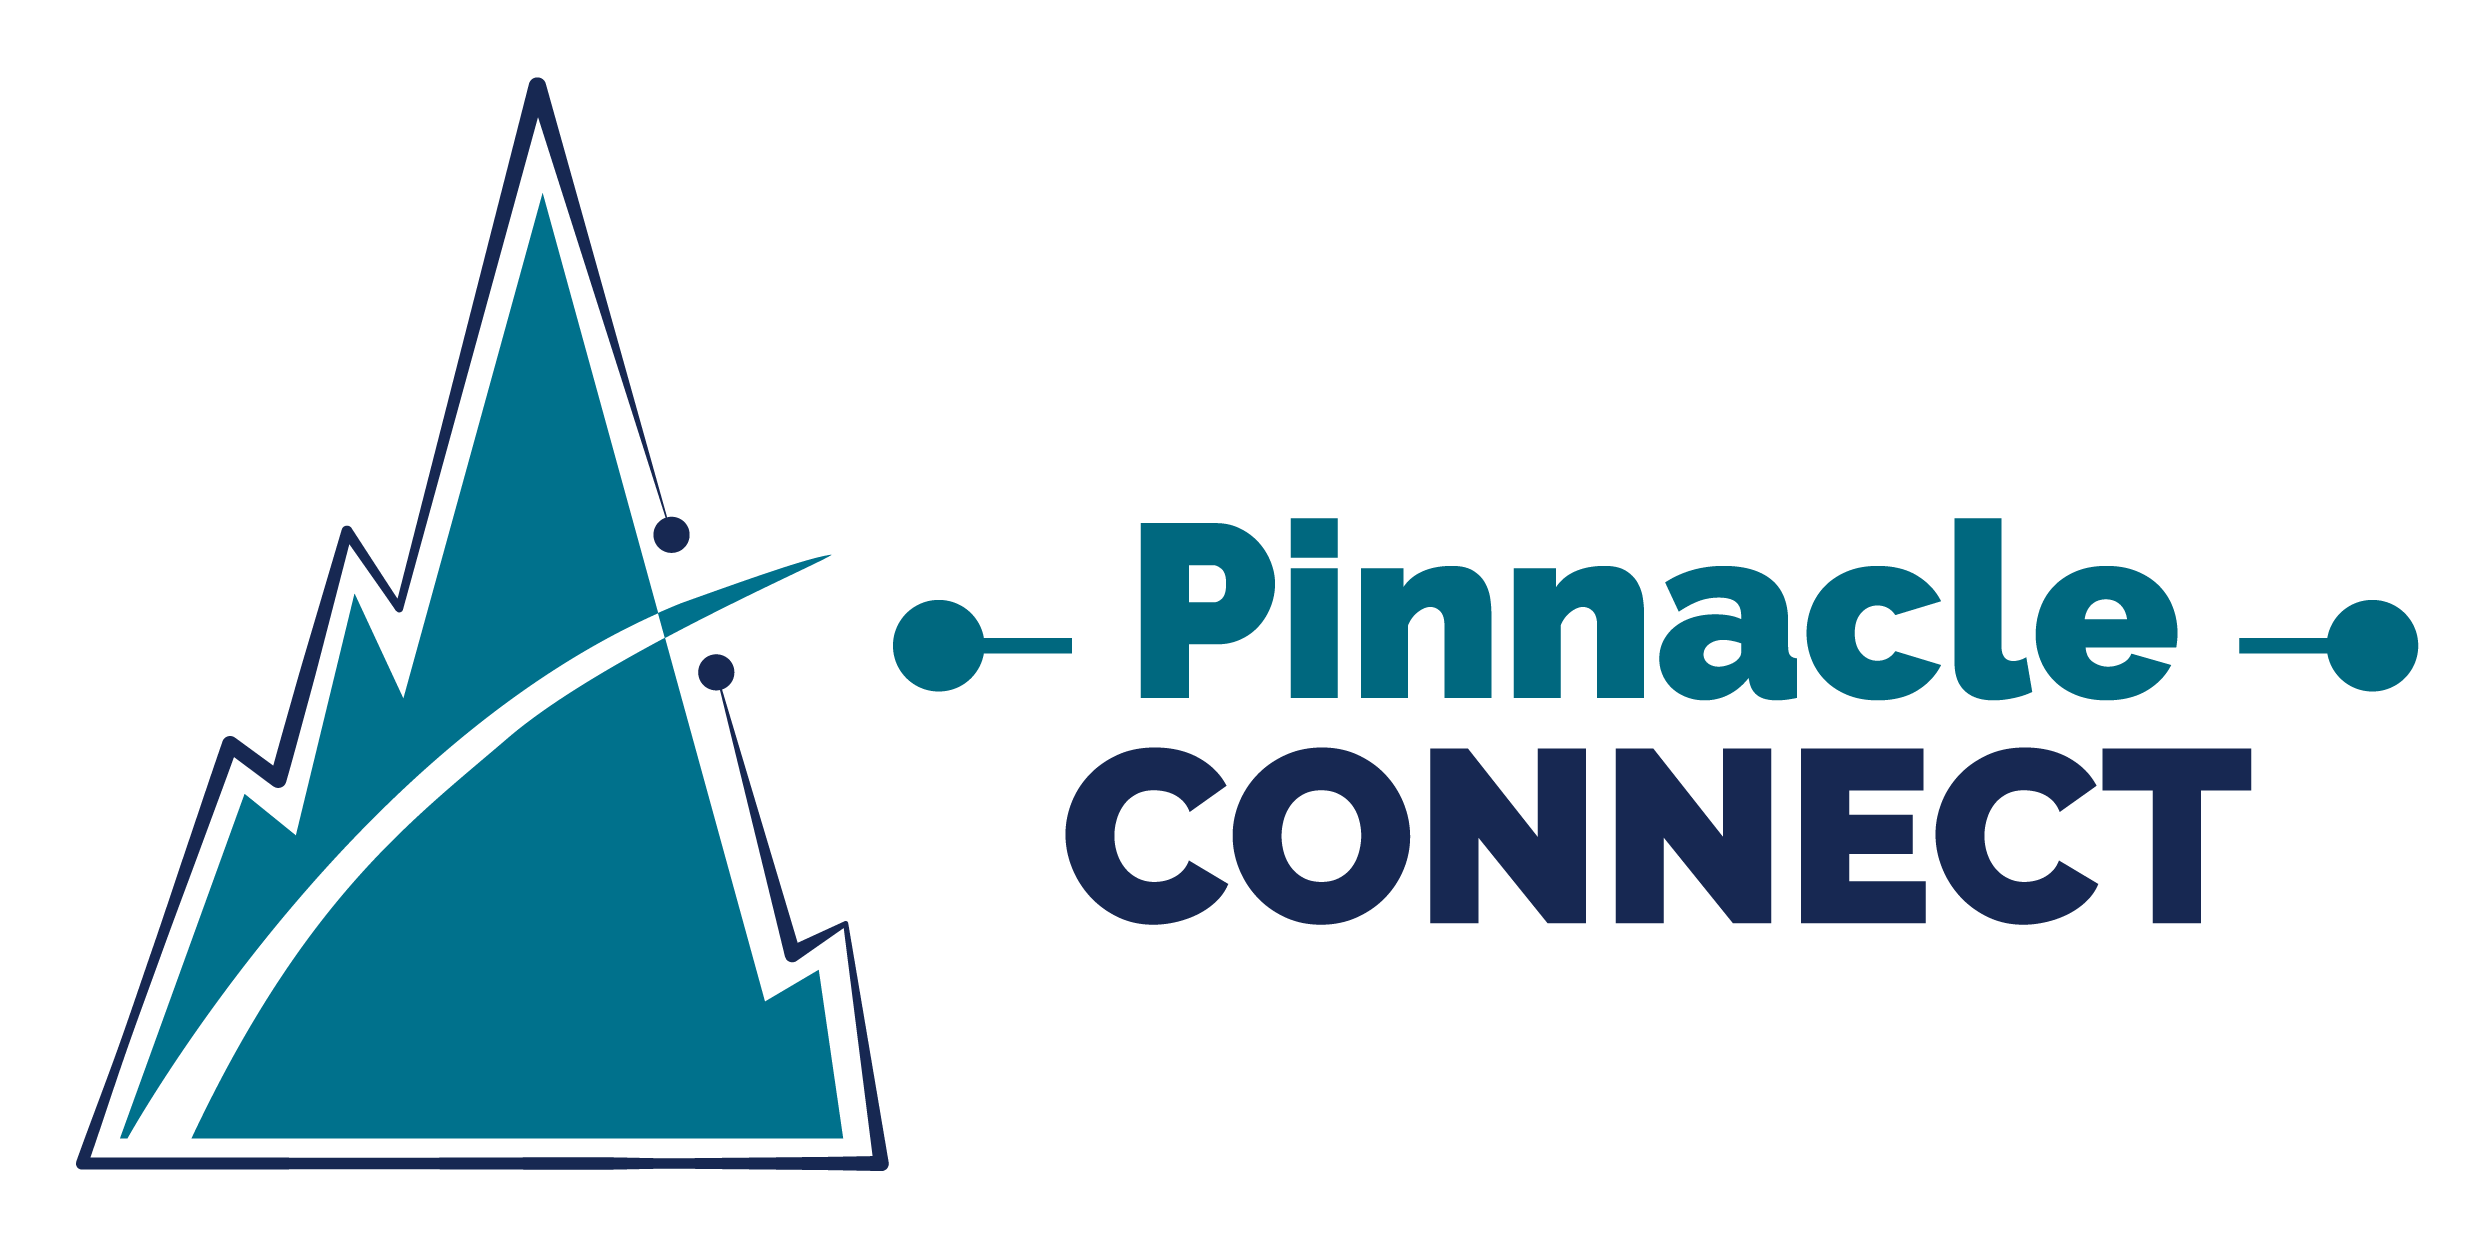 https://www.anelto.com/wp-content/uploads/2021/08/Pinnacle-Connect-Logo_022021-003.png